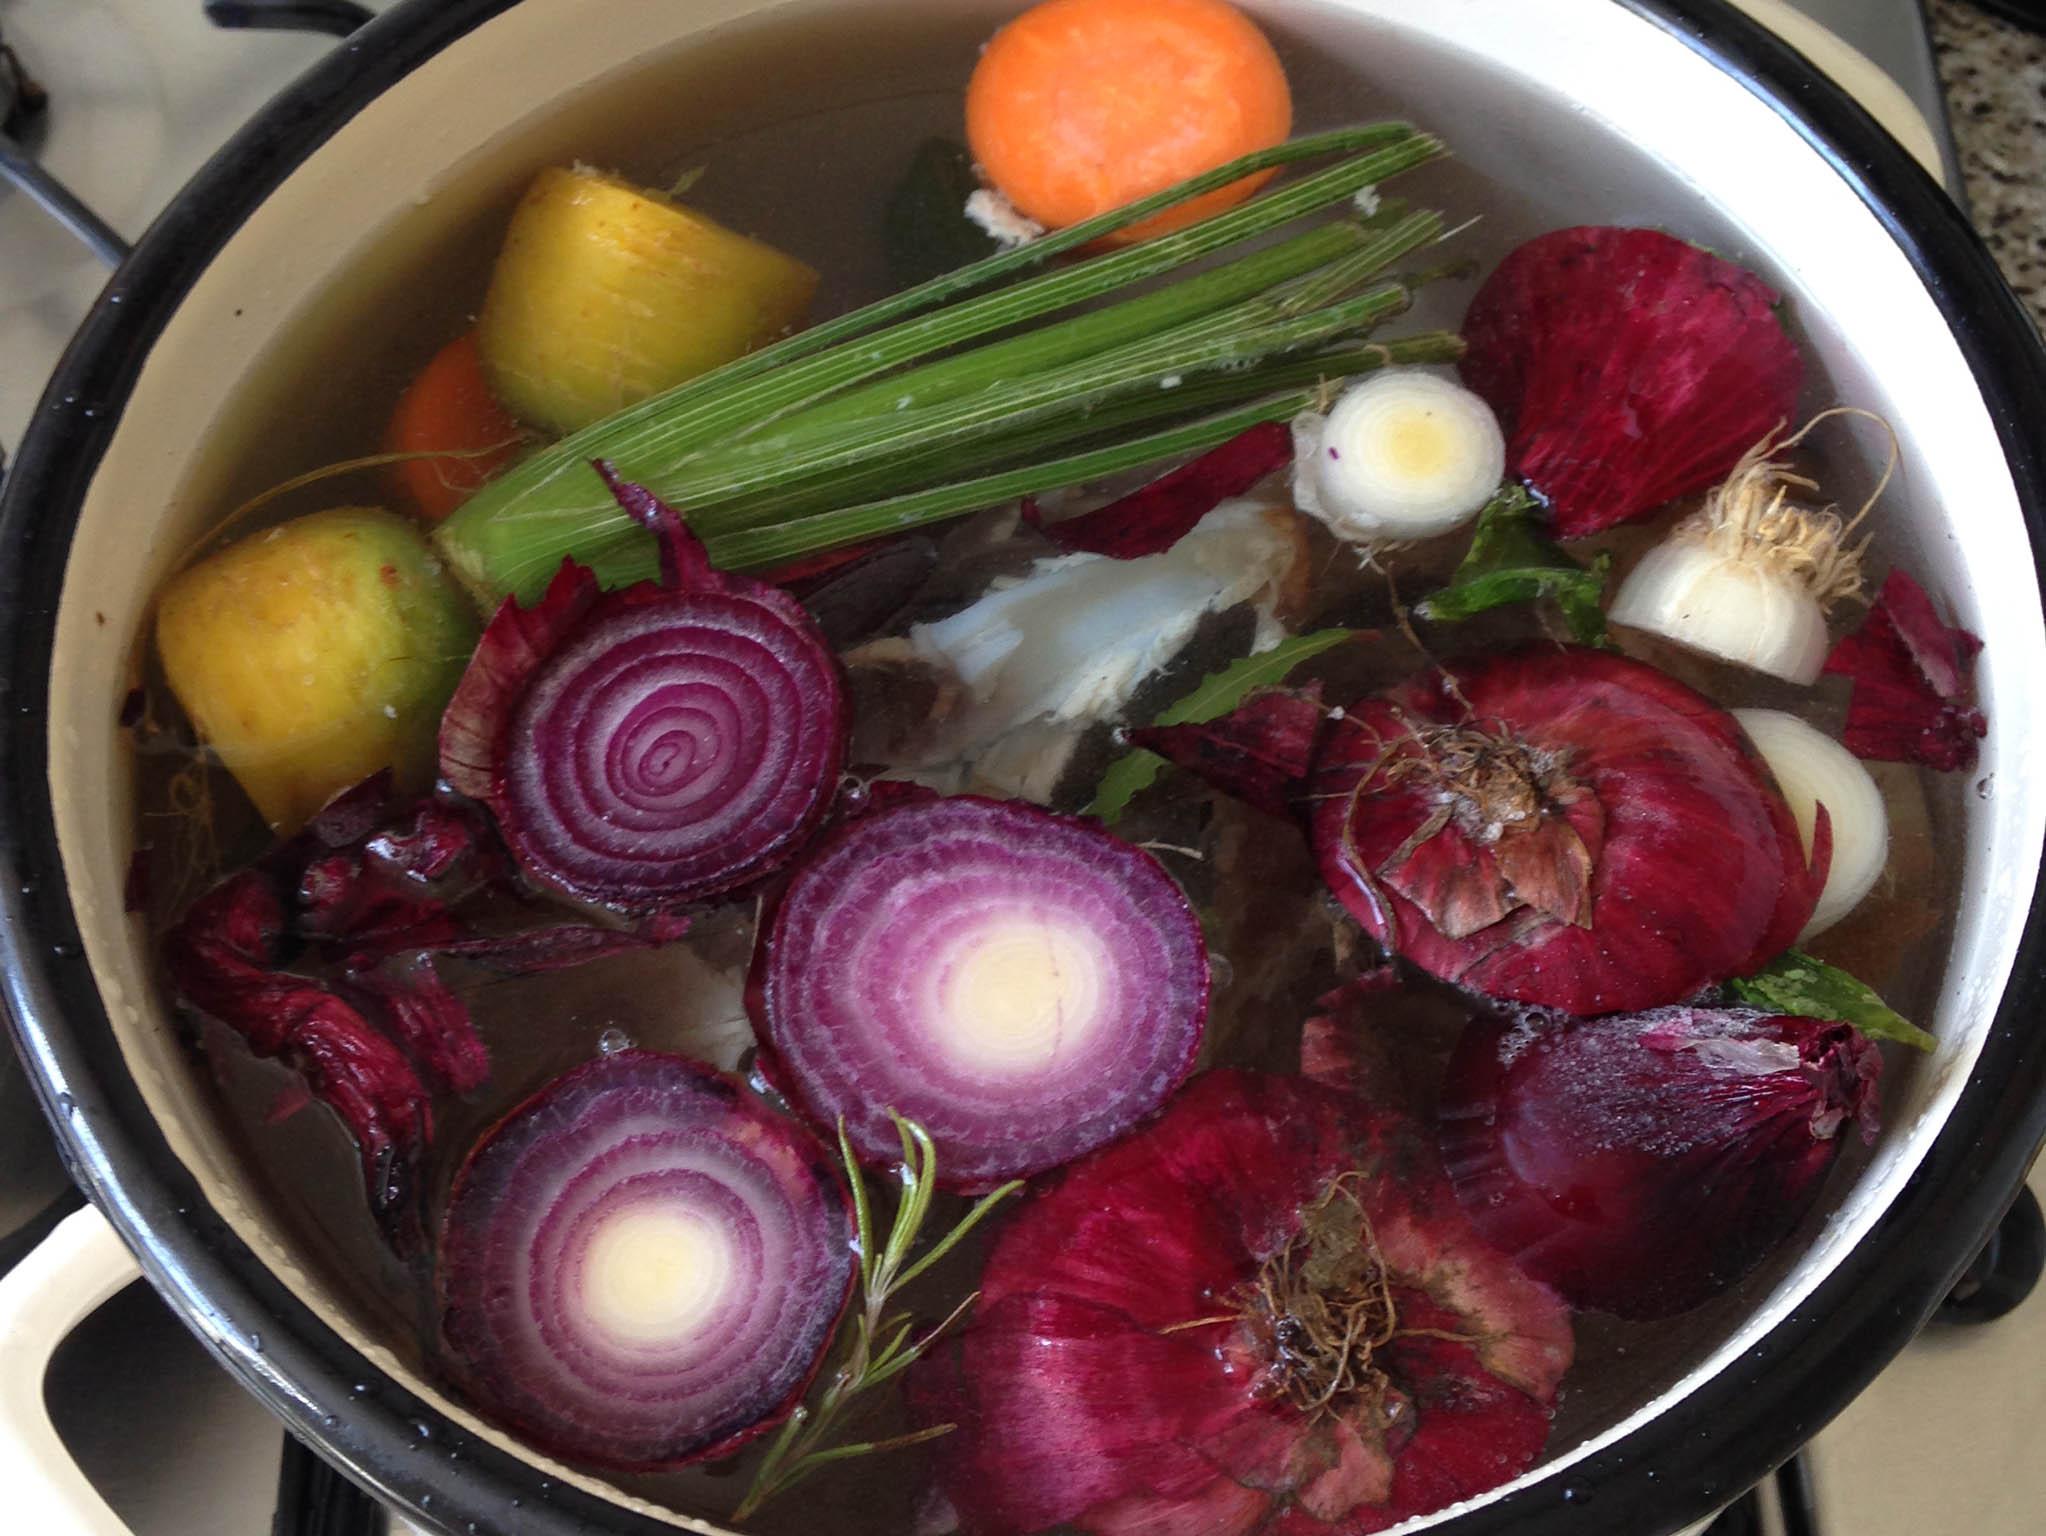 Don't throw away the odds and ends of vegetables, they can be used to make stock